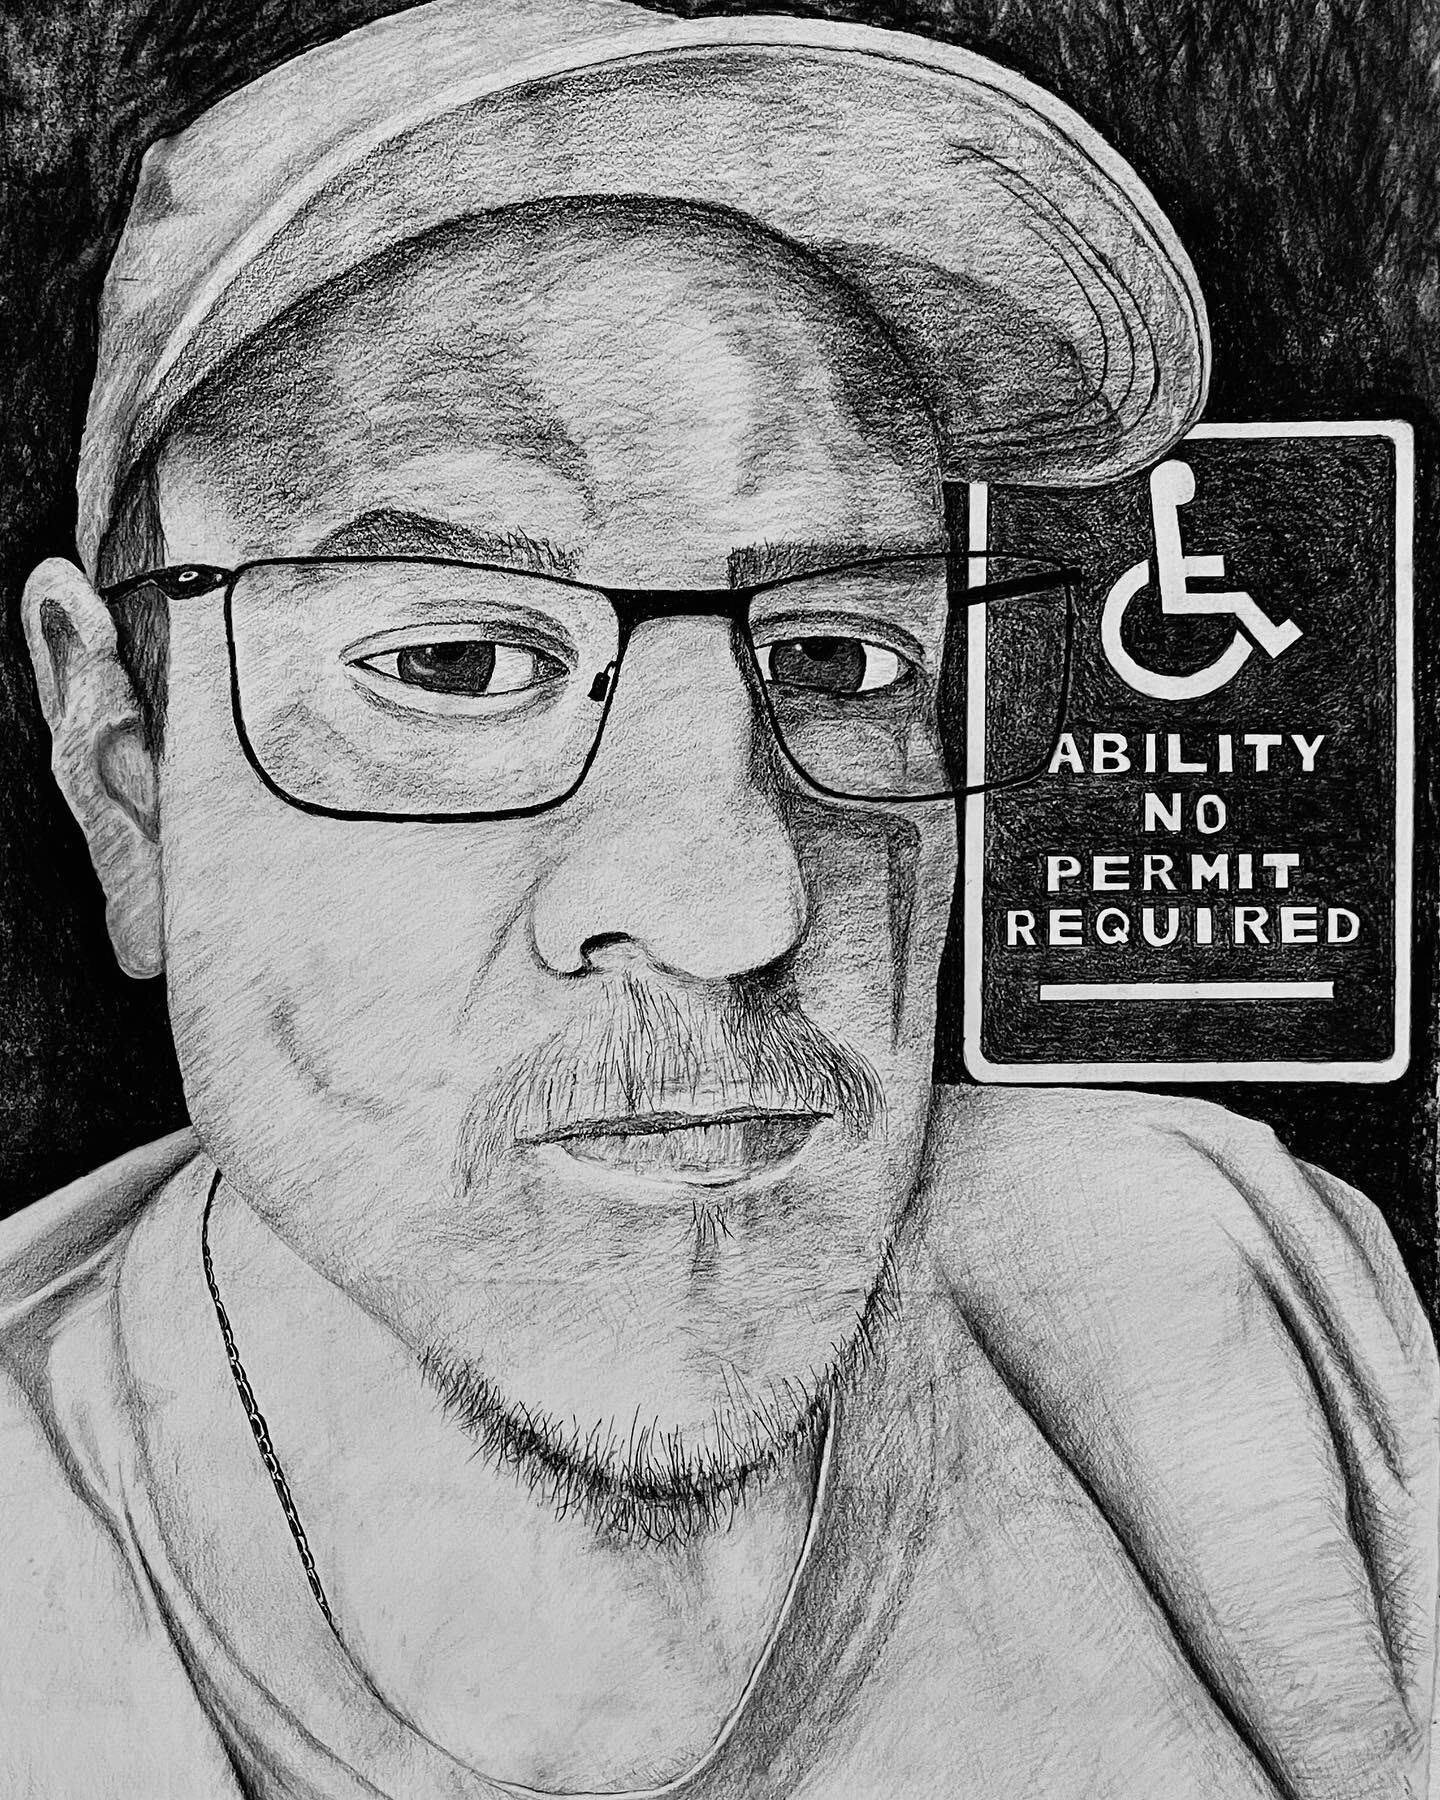 &ldquo;Ability: No Permit Required&rdquo;
self portrait and other works by Gilbert Soucy. Drawing 1, Manchester Community College
.
.
#22x30rivesbfk #charcoal #selfportrait #selfportraitdrawing #graphite #ballpointpen #ballpointpendrawing #urbanlands